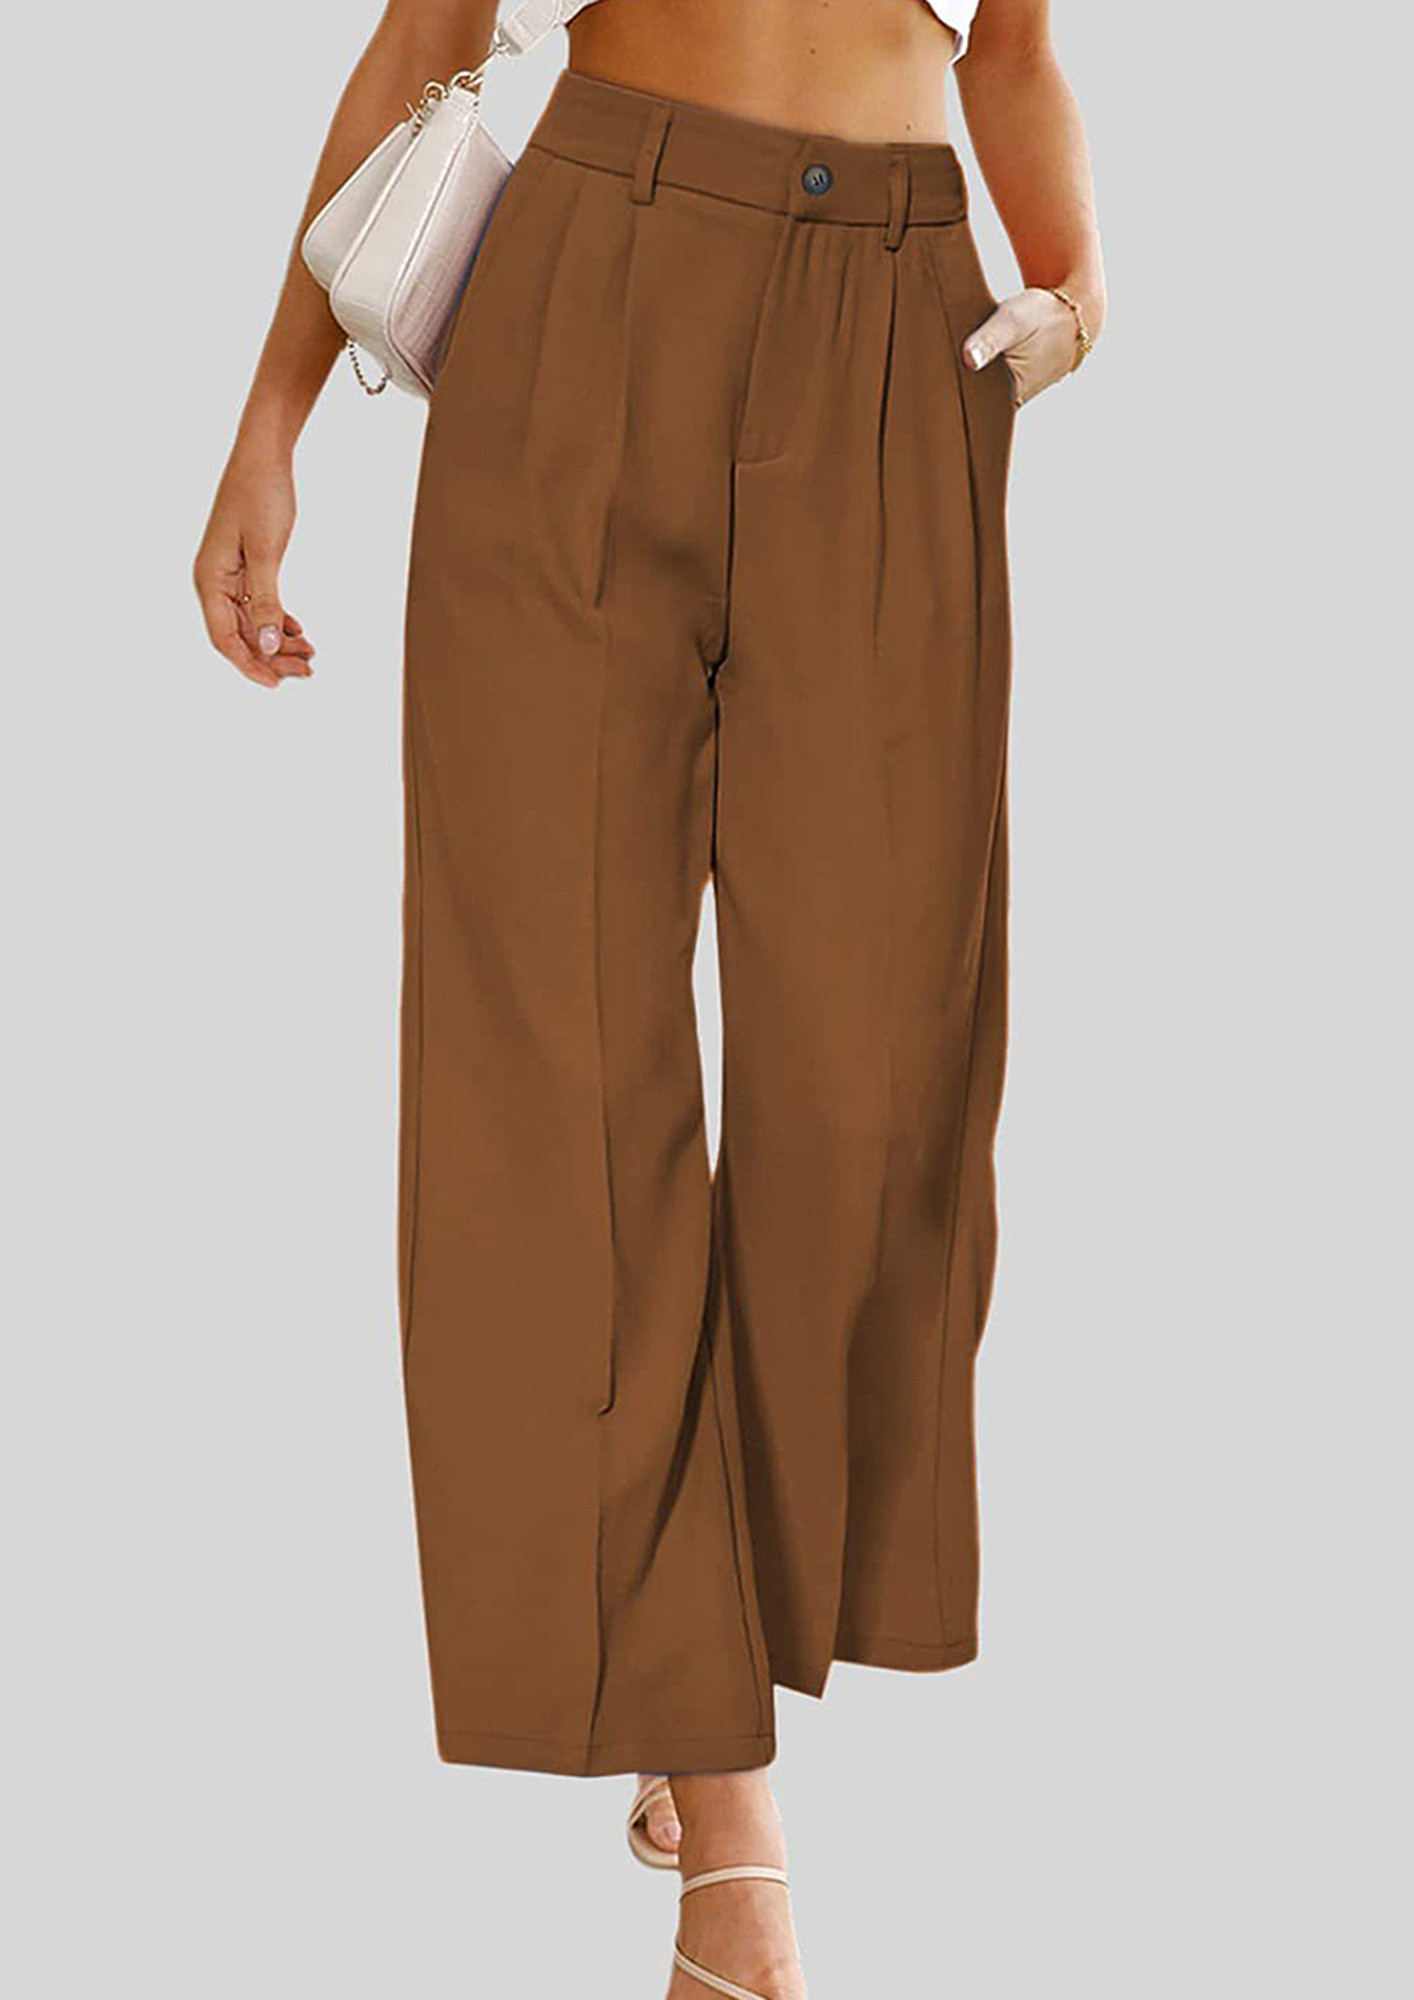 Women's Trousers | Casual Trousers & Pants for Women | ASOS-anthinhphatland.vn